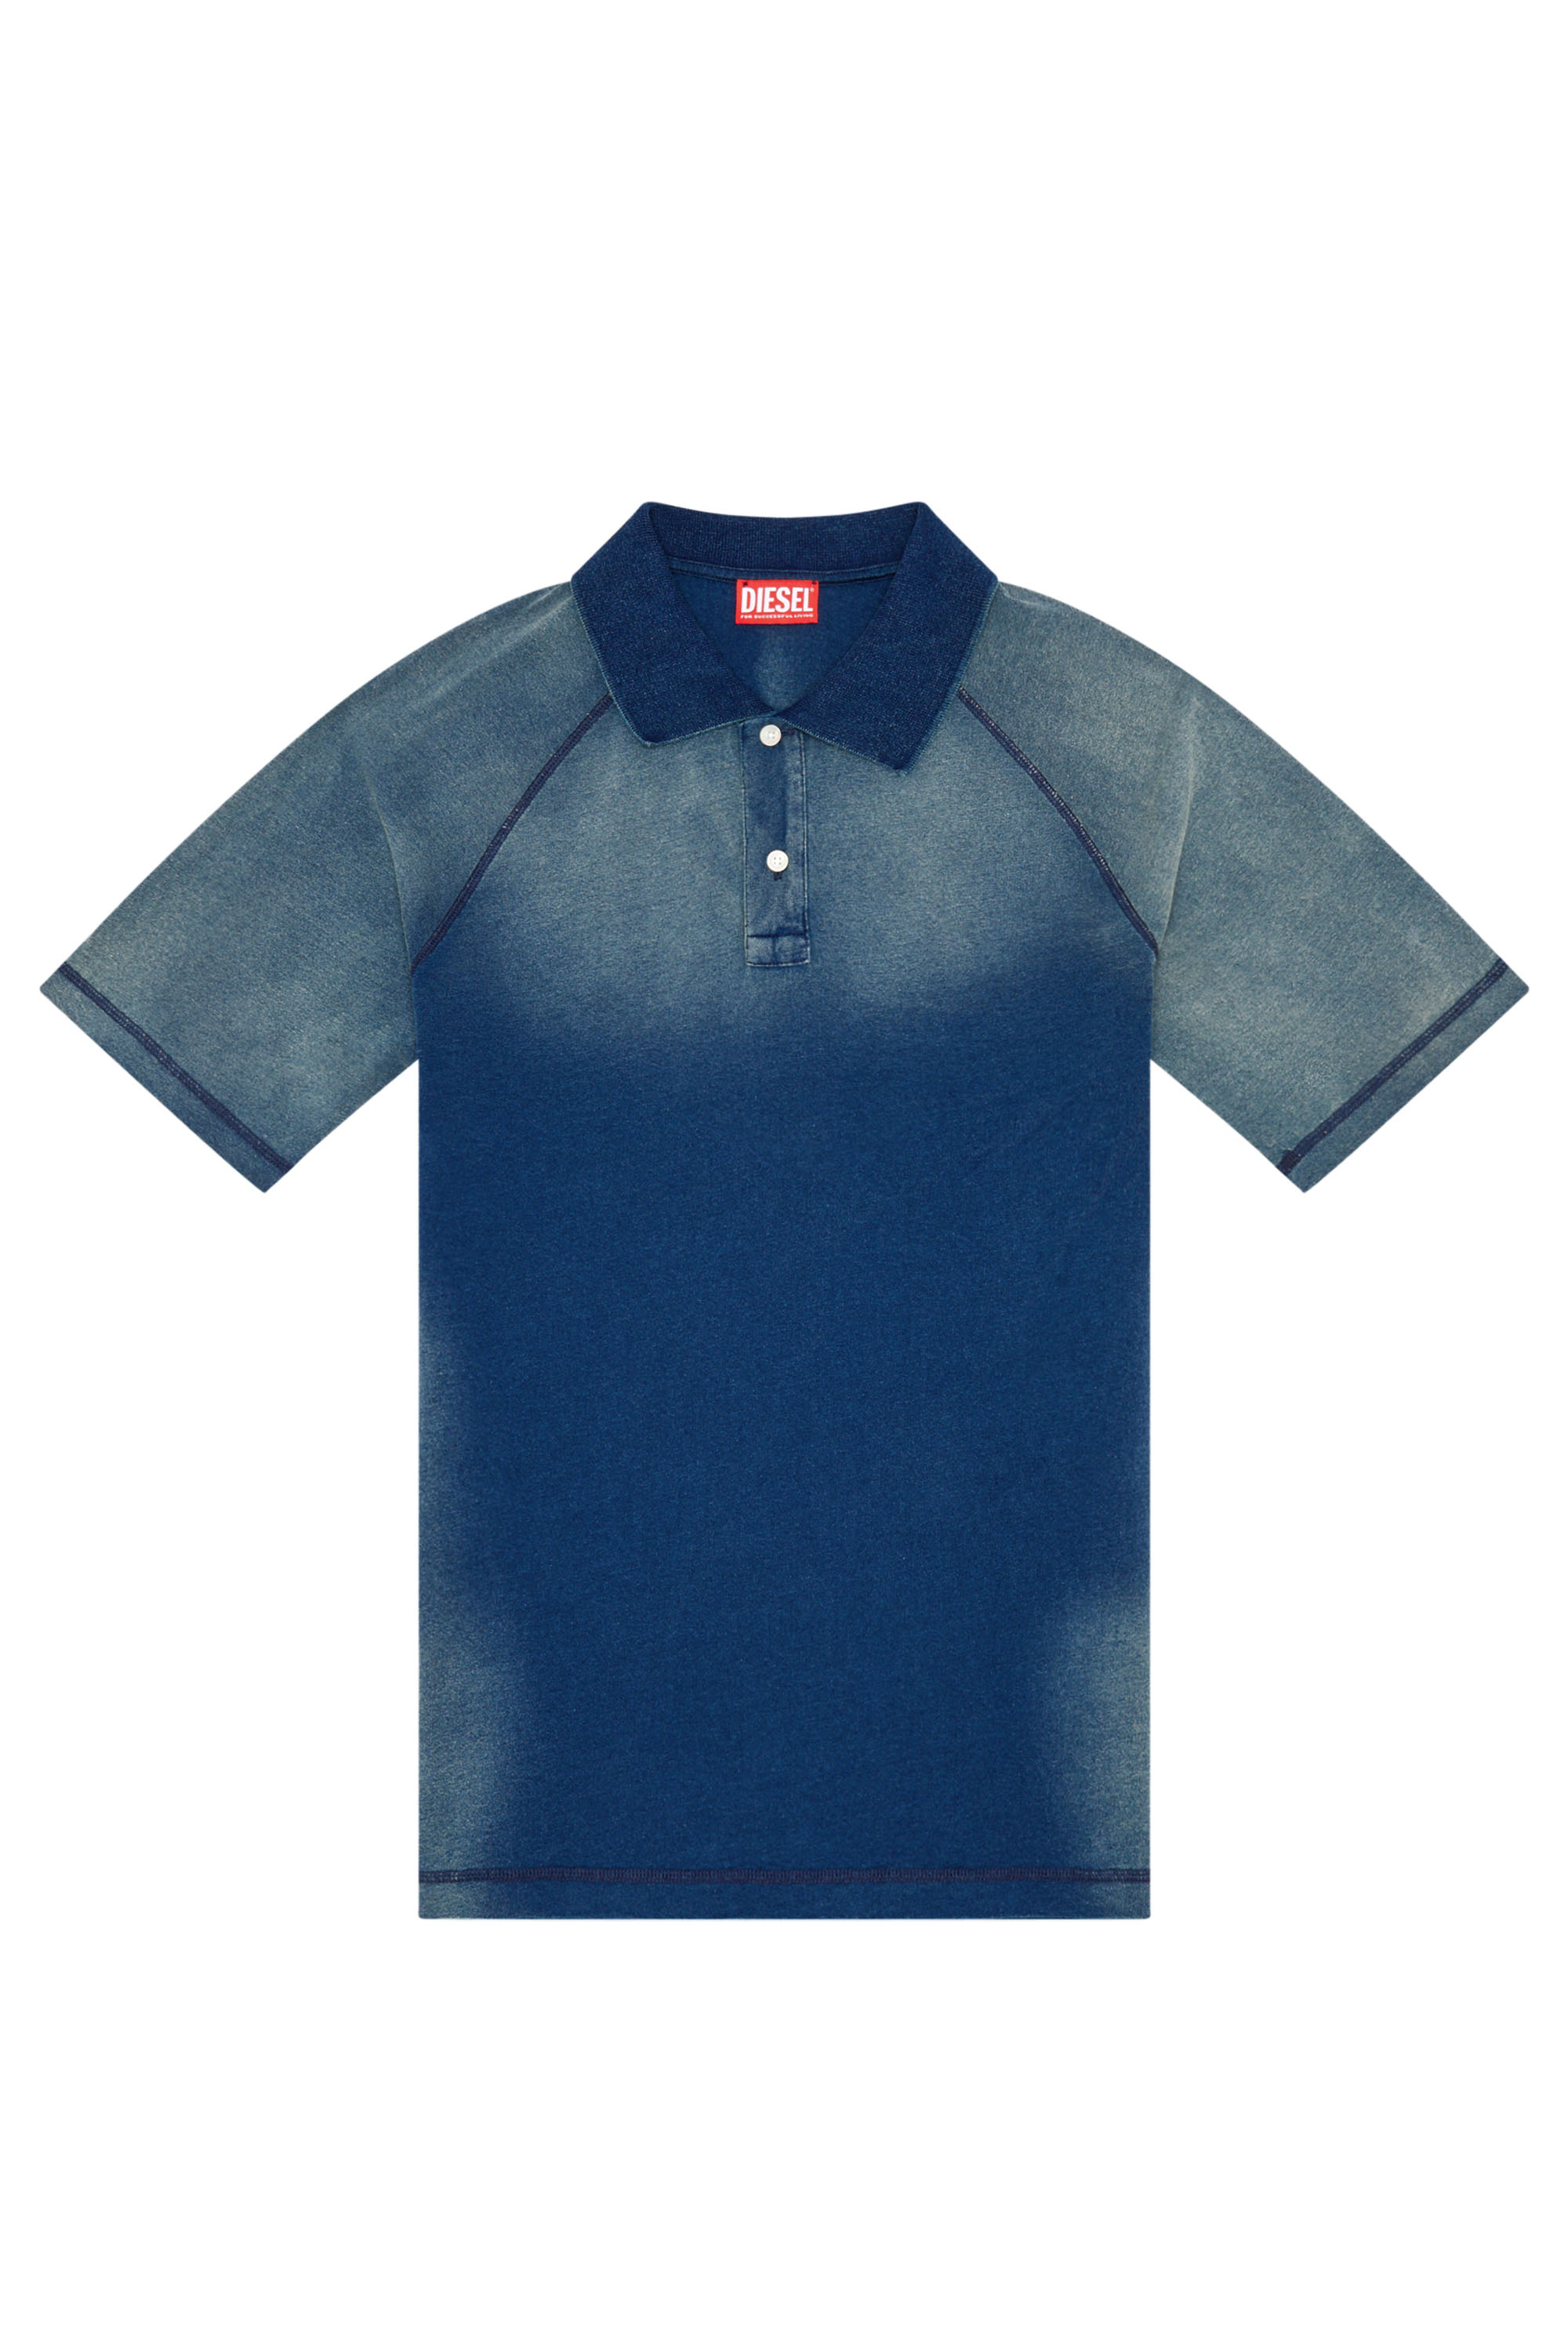 Diesel - T-RASMITH, Man Polo shirt with sun-faded effects in Blue - Image 3